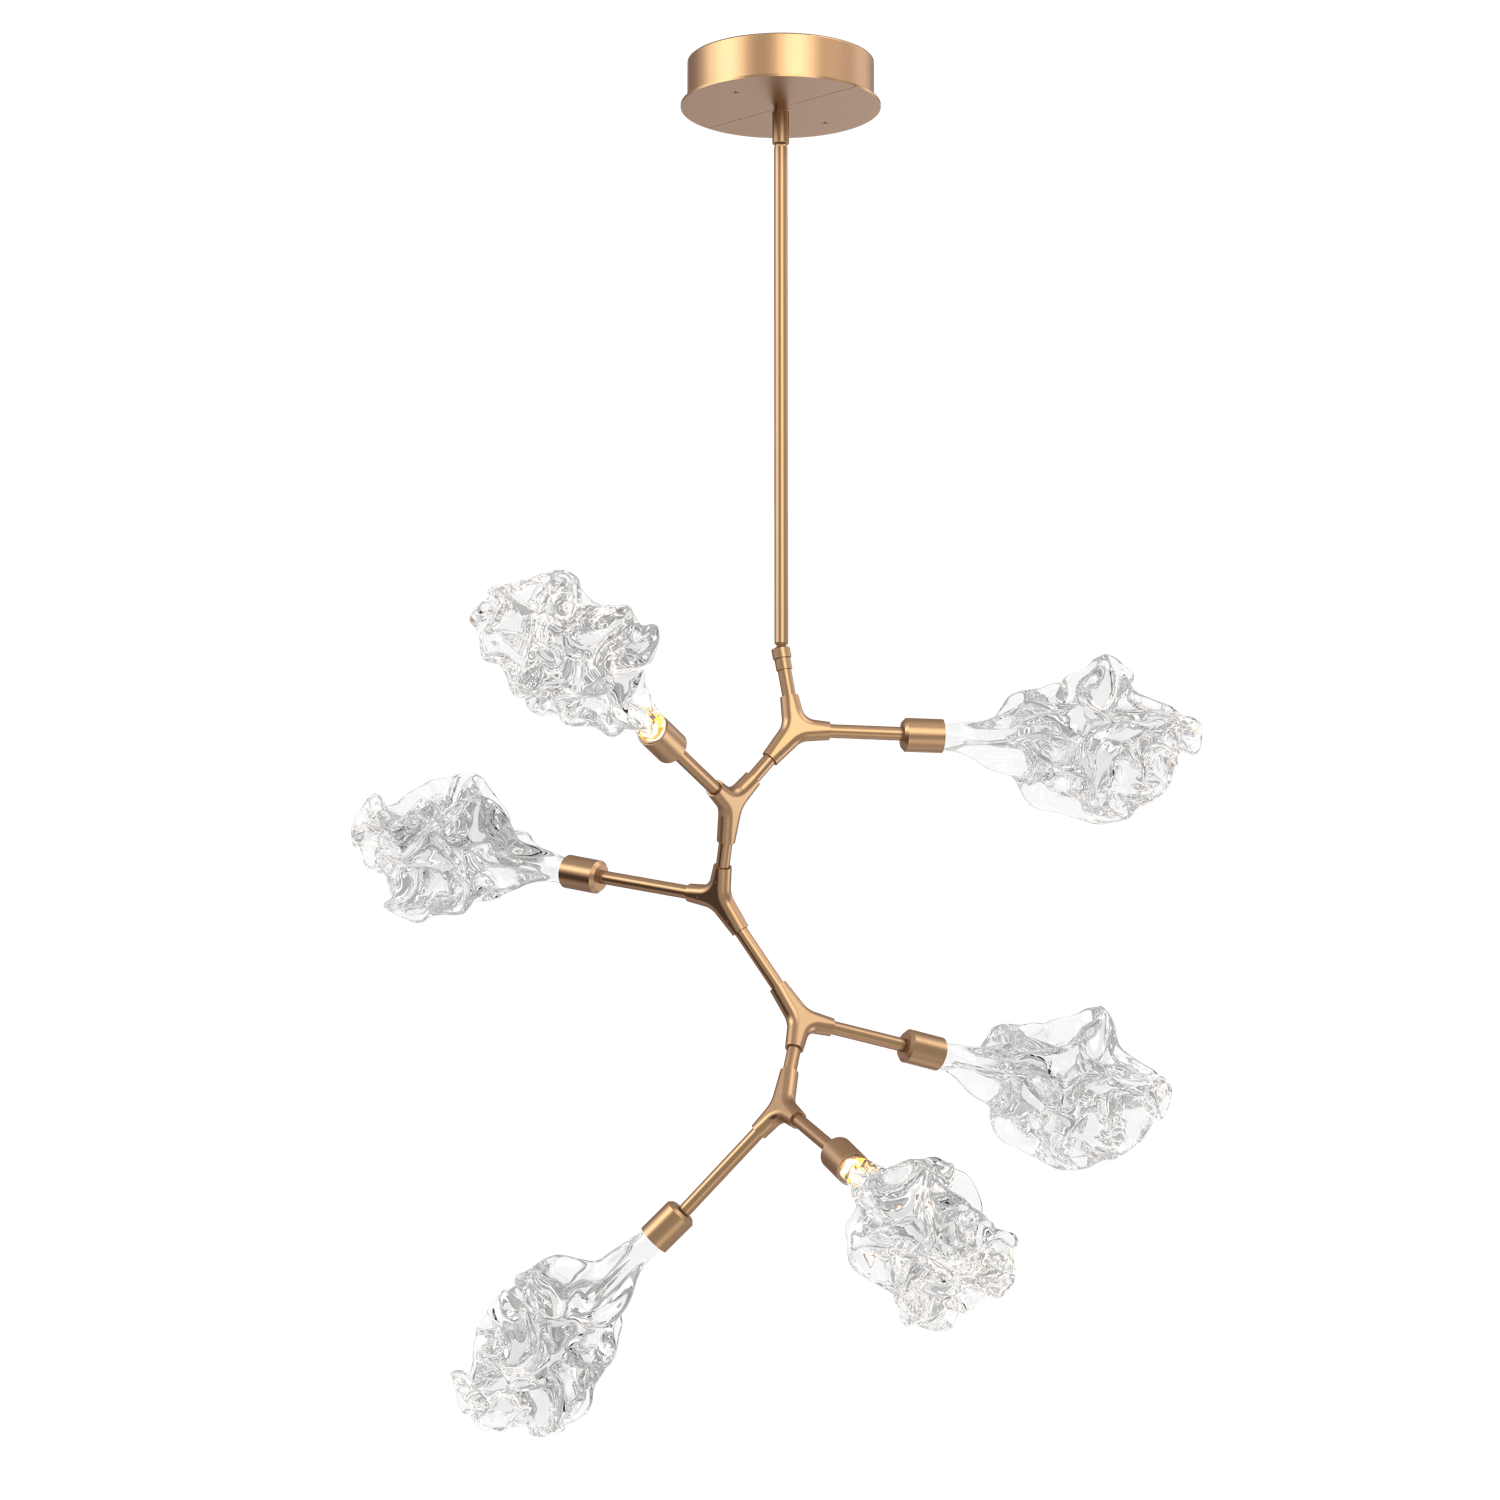 CHB0059-VA-NB-Hammerton-Studio-Blossom-6-light-organic-vine-chandelier-with-novel-brass-finish-and-clear-handblown-crystal-glass-shades-and-LED-lamping